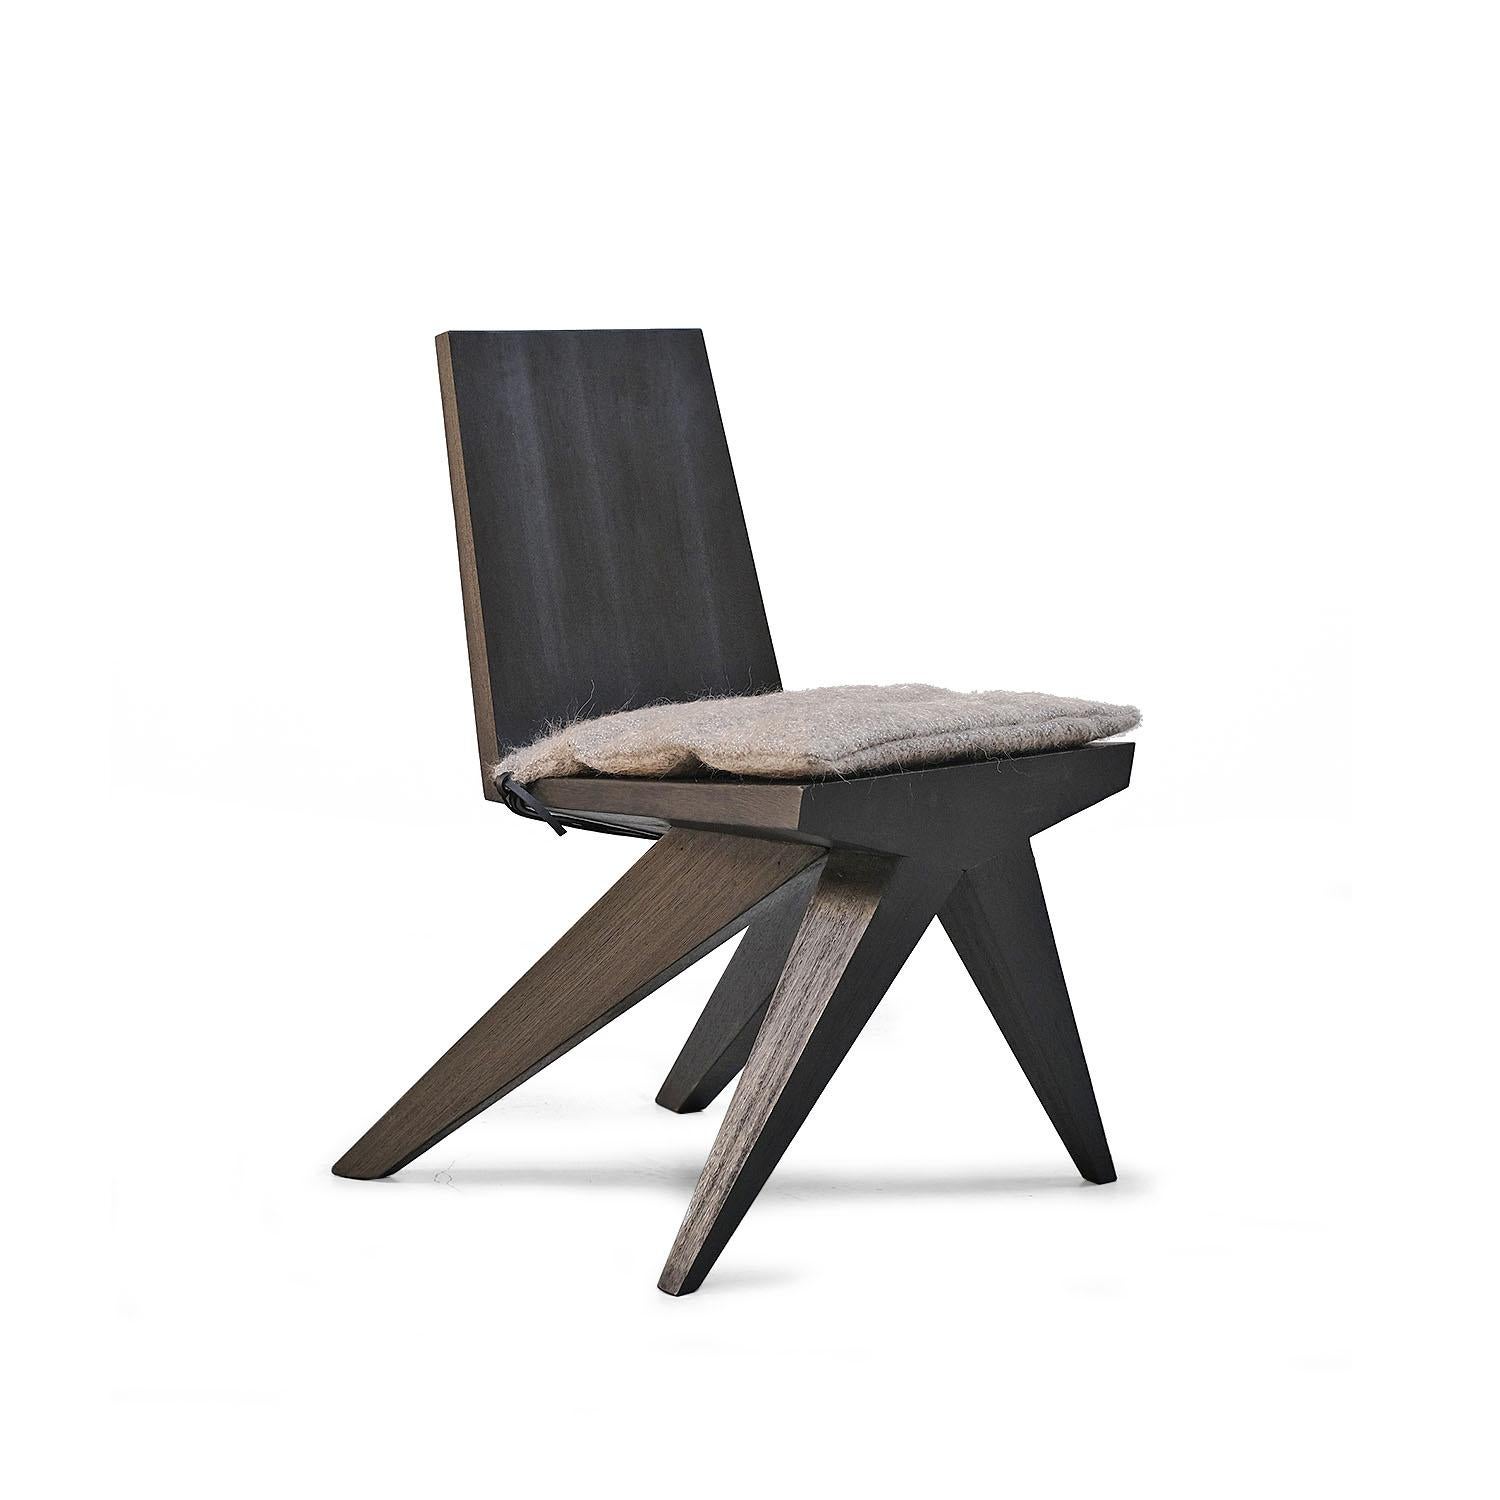 Contemporary dining chair in iroko wood - v-dining chair by Arno Declercq

Material: 
Burned and waxed Iroko wood.
Cushion made in mohair by Pierre Frey. More fabrics available on request.

Dimensions: 
46 cm W x 57 cm L x 81 cm H
18” W x